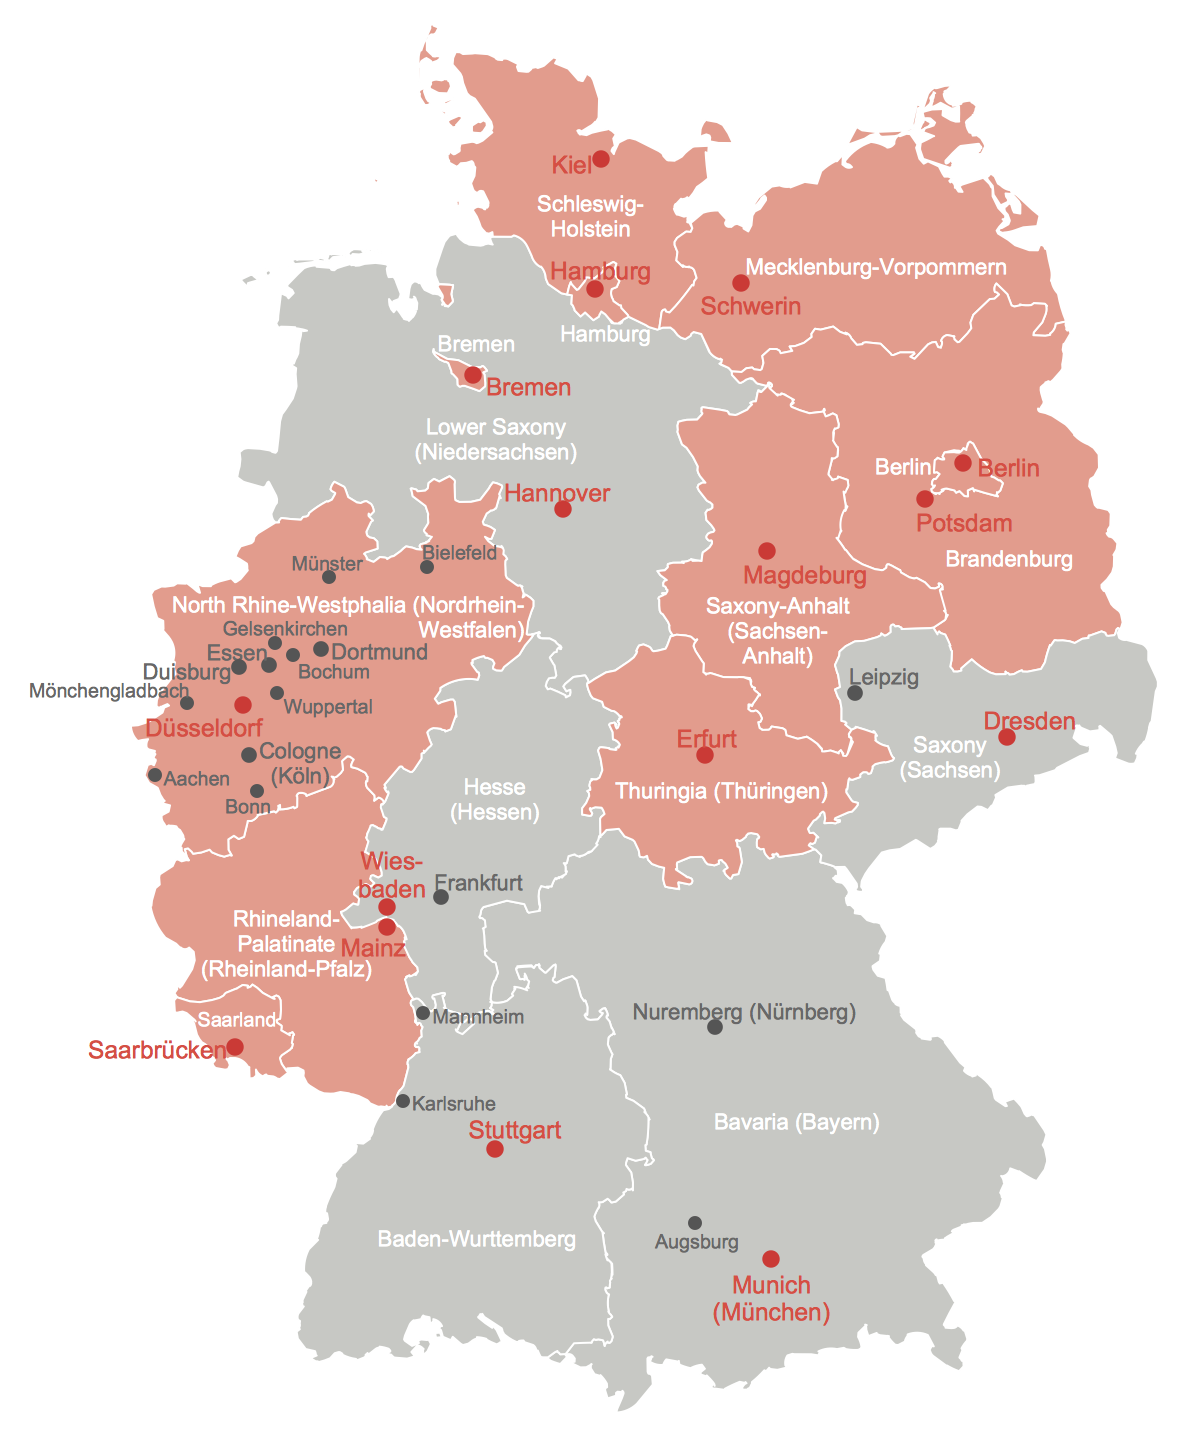 Map of Germany - States with Freedom of Information Legislation